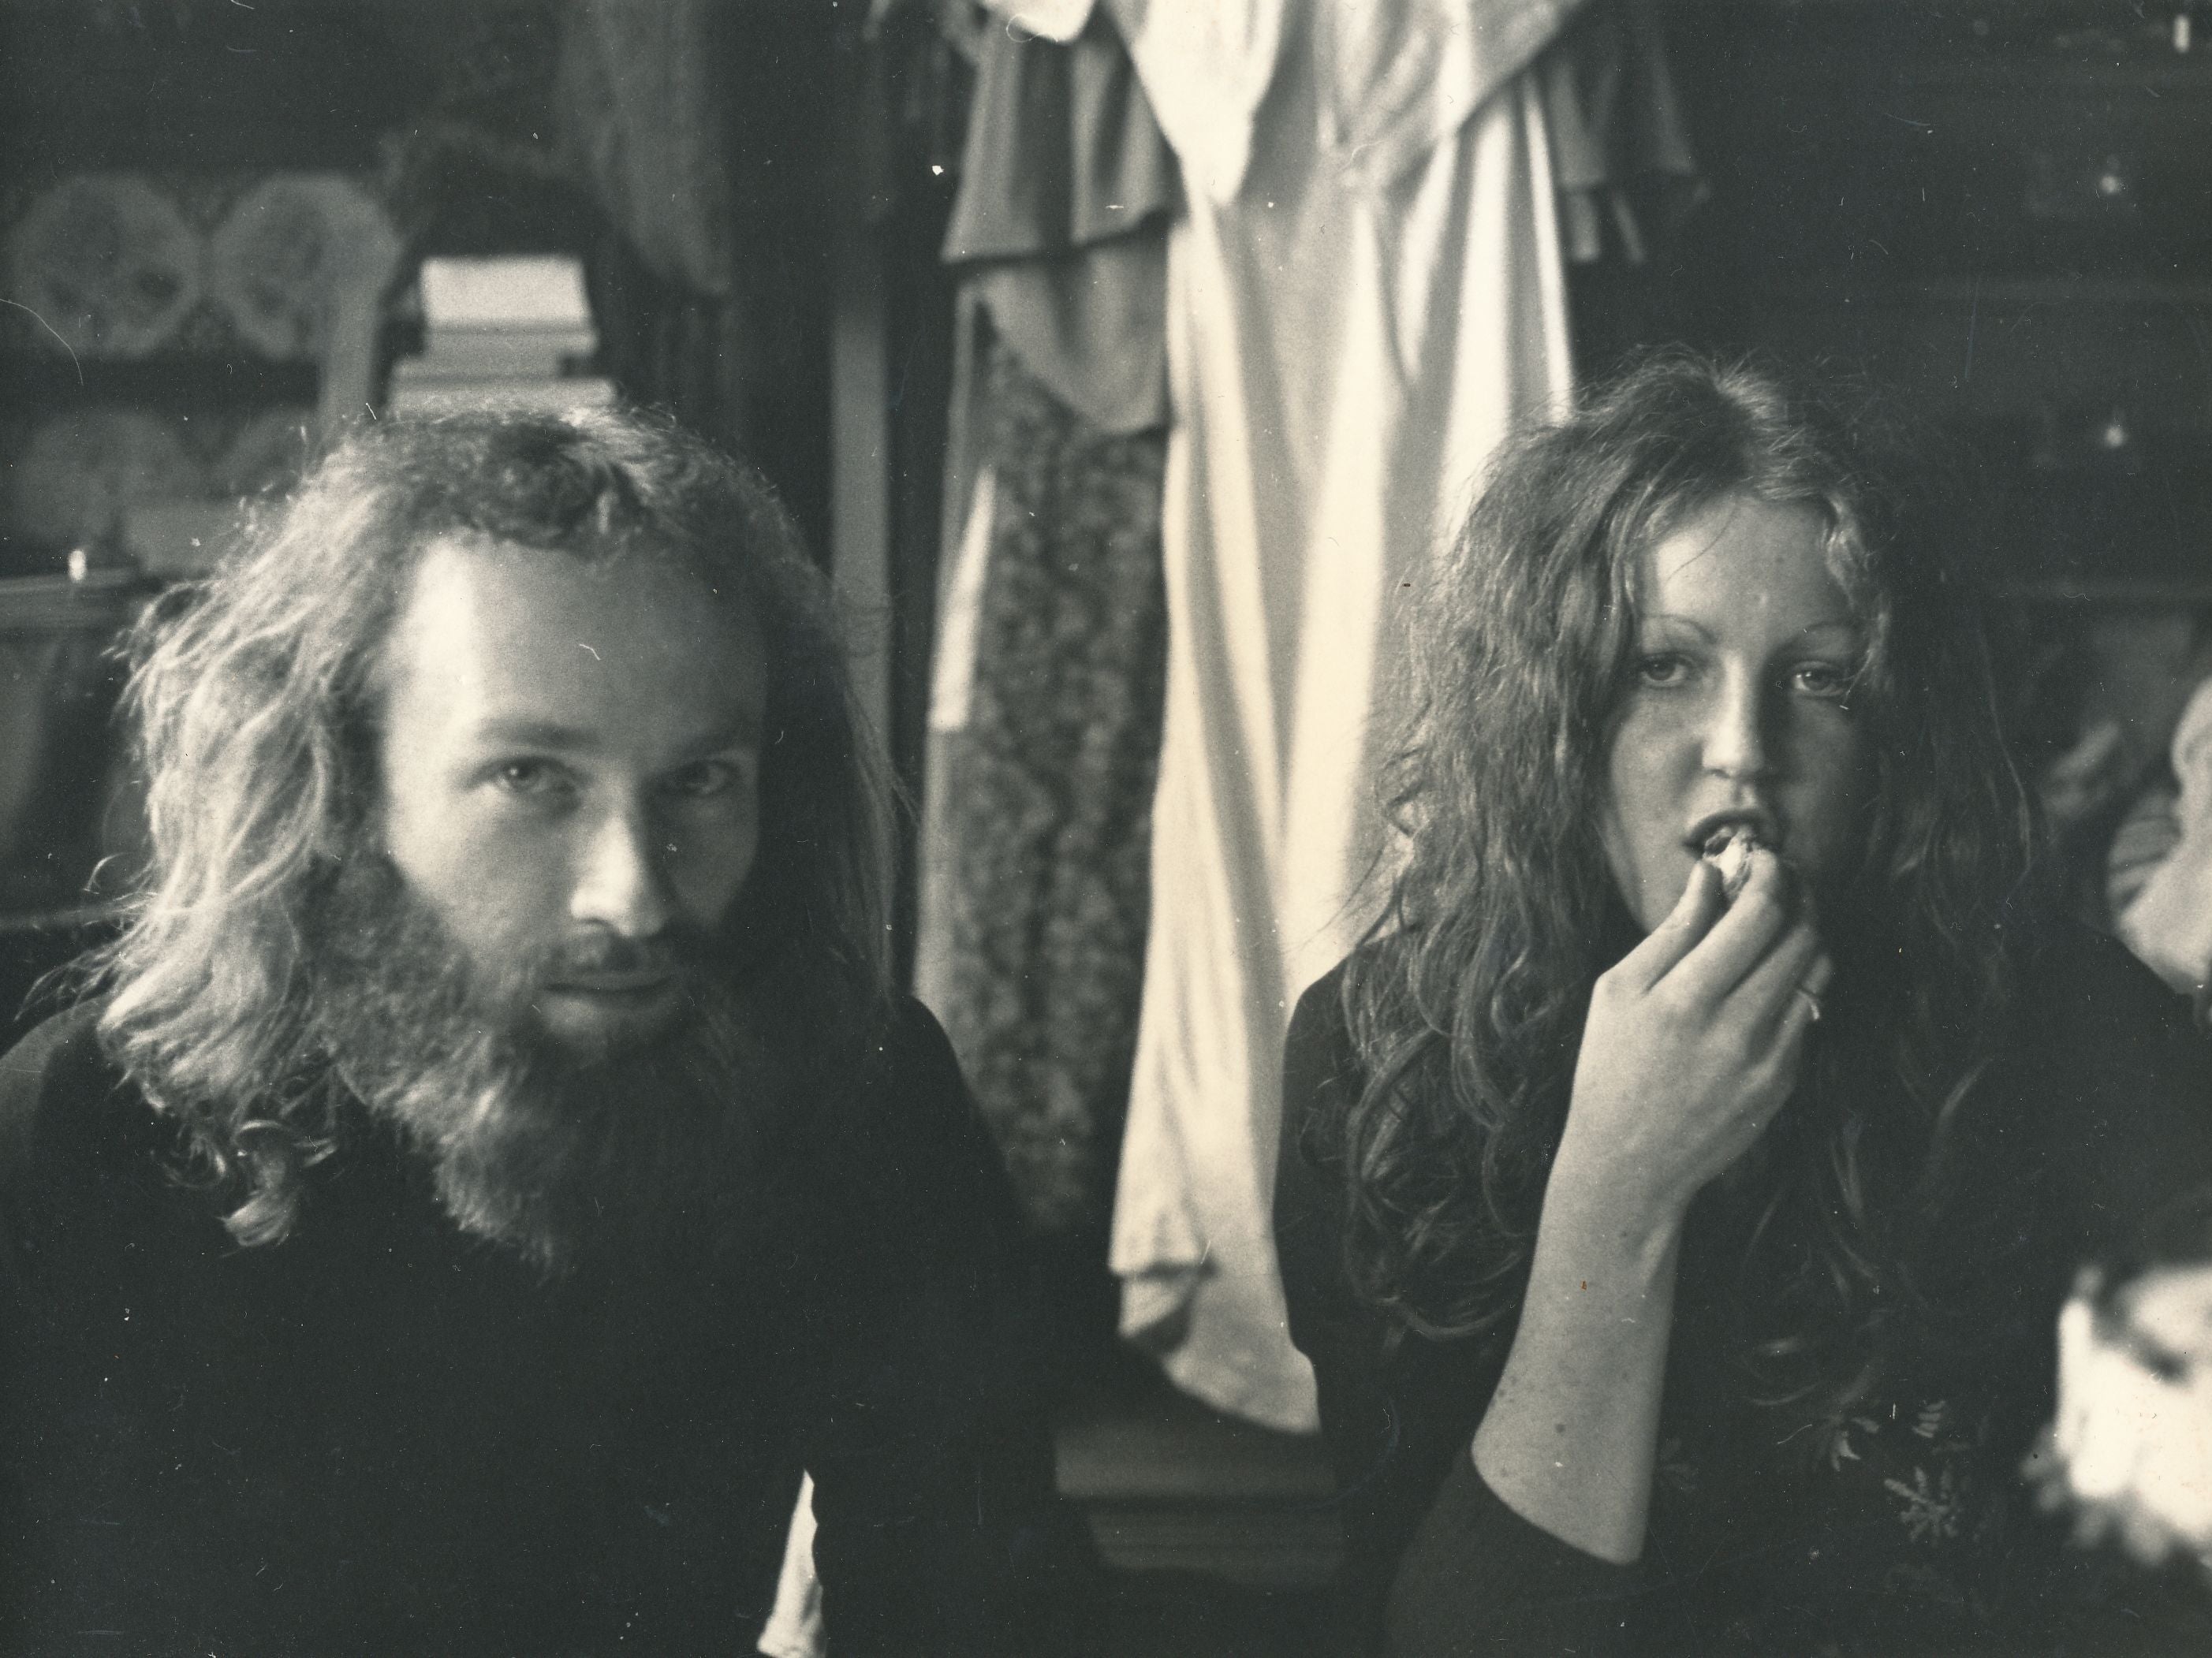 Holly Williams’s parents at Scot Hay in 1975